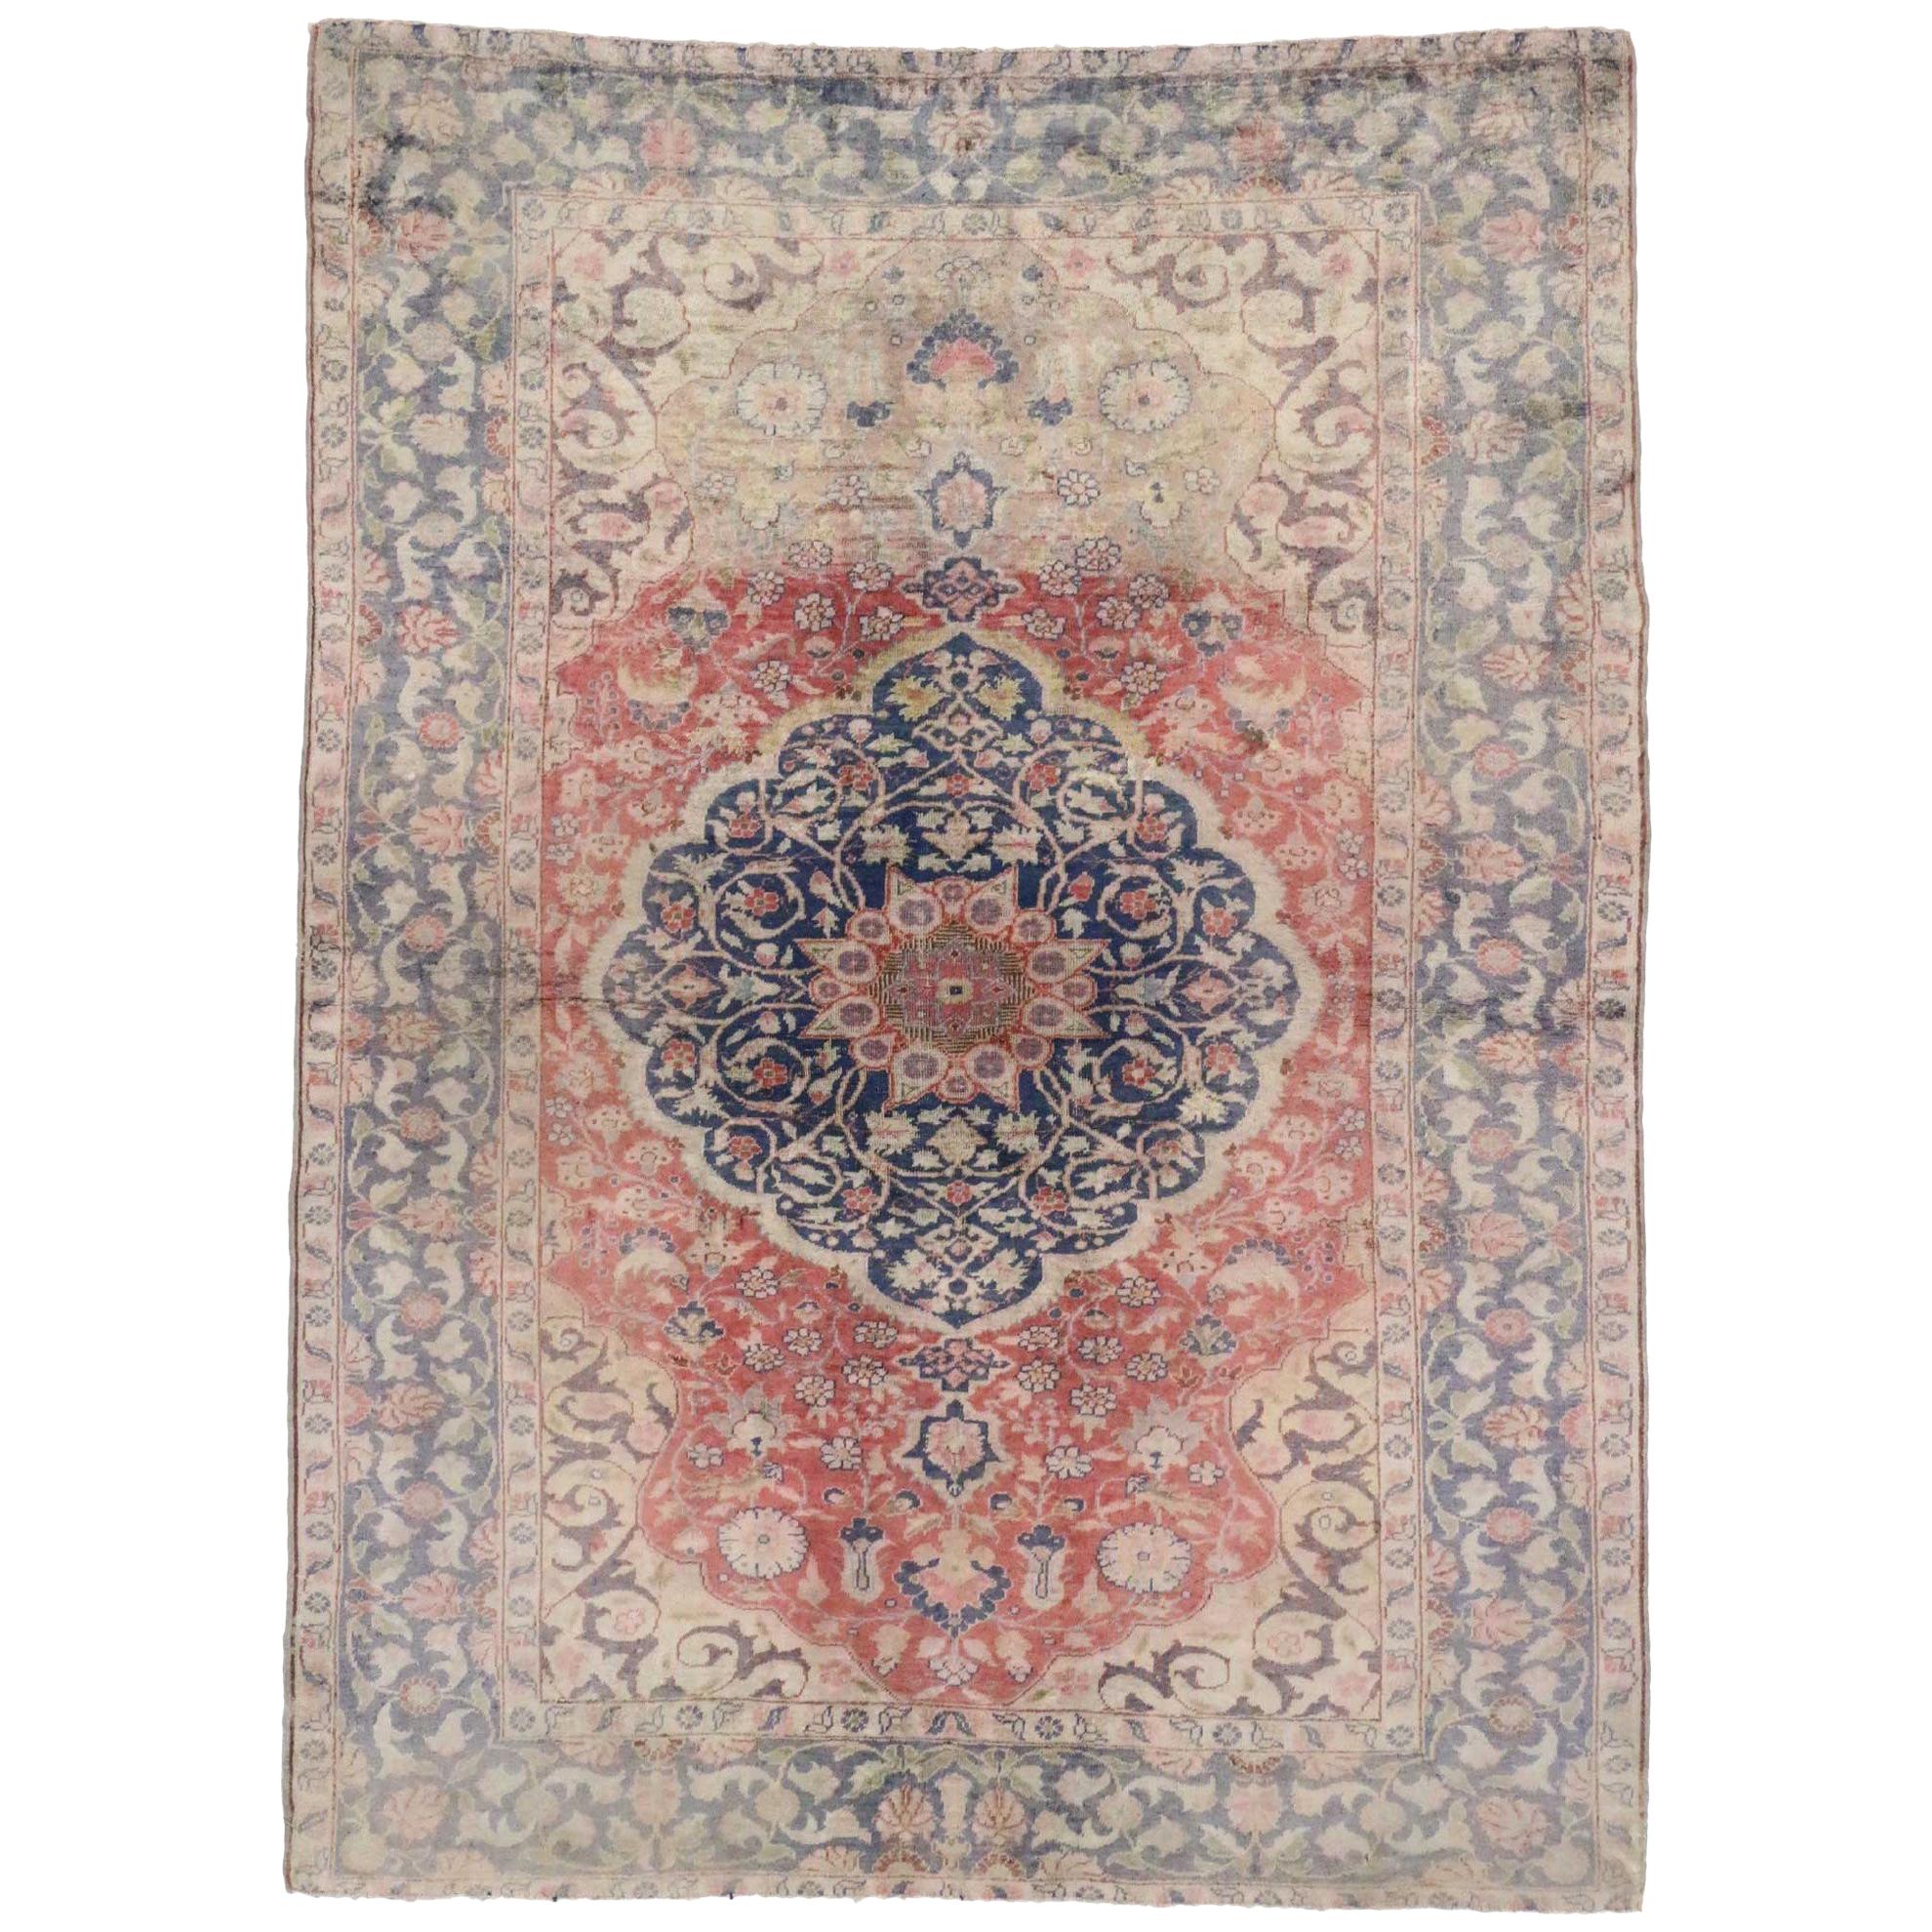 Distressed Vintage Turkish Sivas Rug with Romantic English Country Style